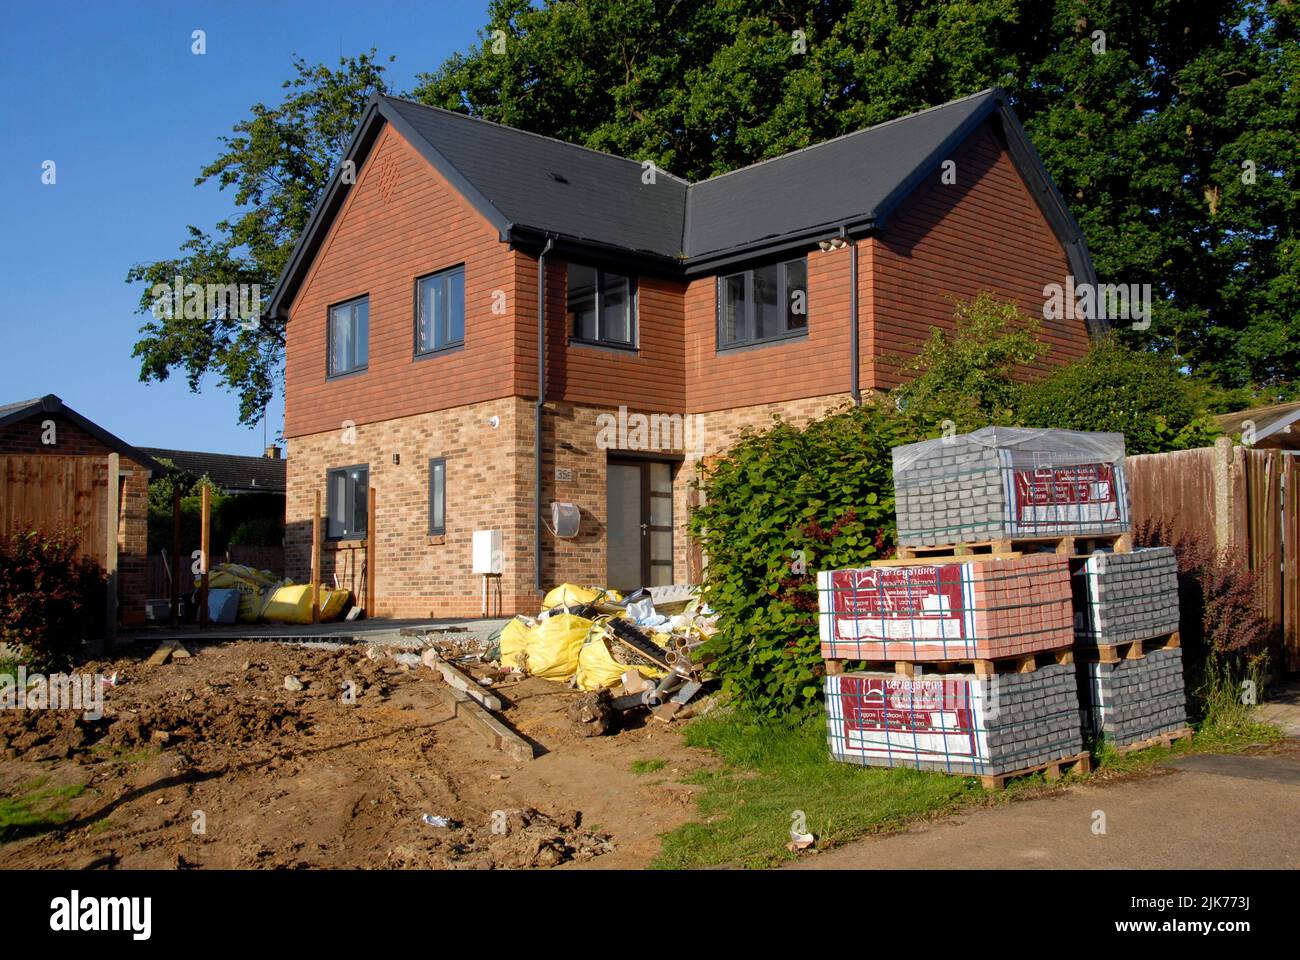 Newly-built house, largely completed but with paving slabs still to be installed and some rubbish for disposal Stock Photo